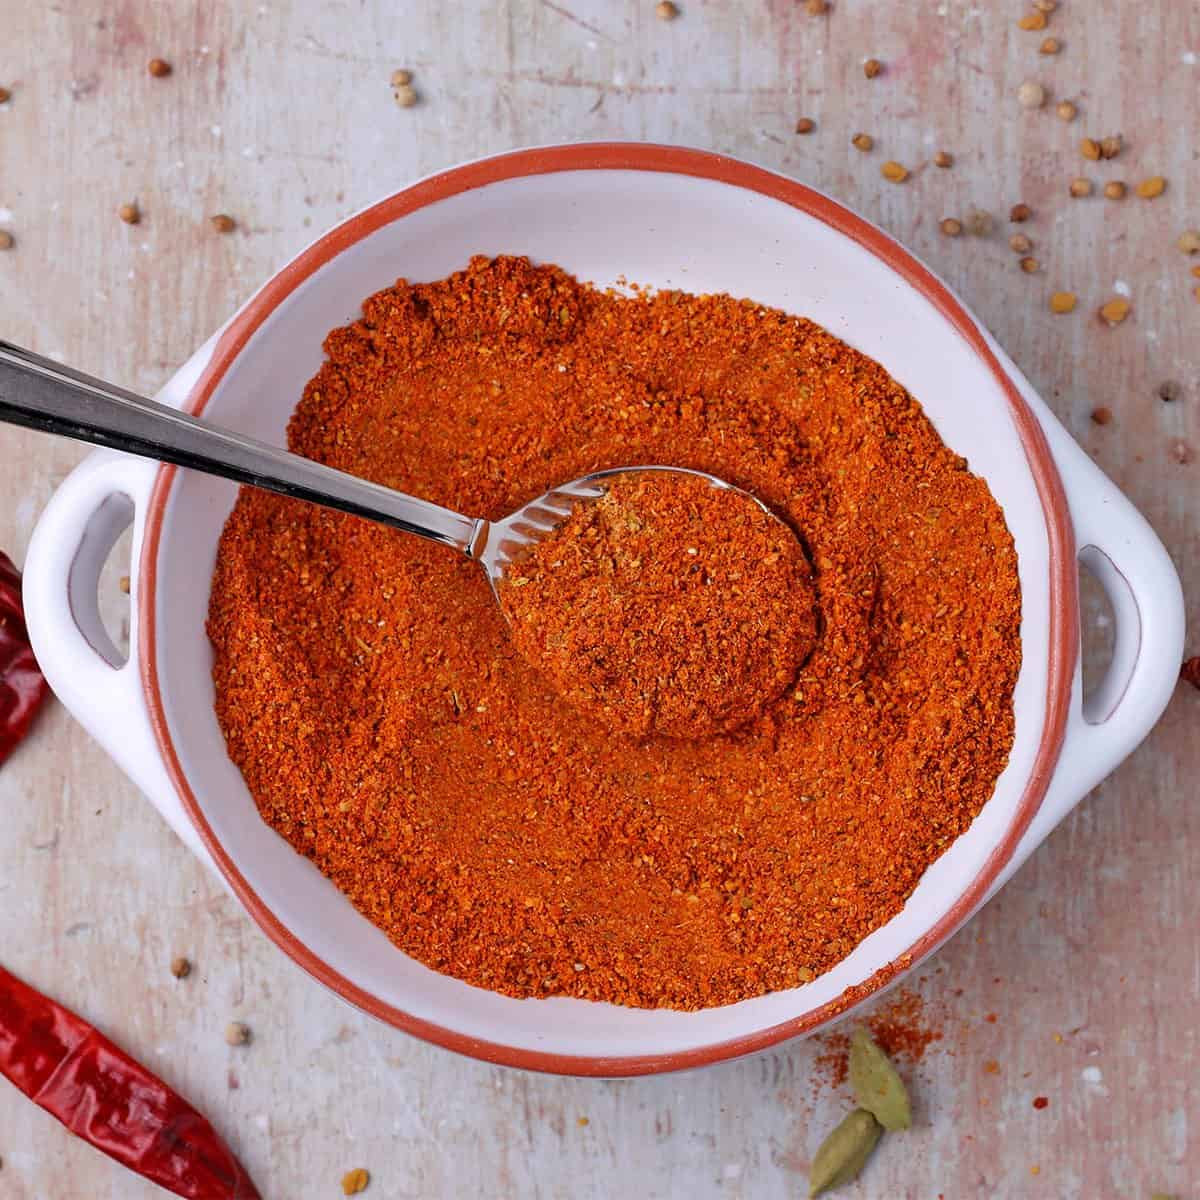 bowl of red berbere spice blend with dried red chilies, cardamom pods, fenugreek seeds, and coriander seeds.